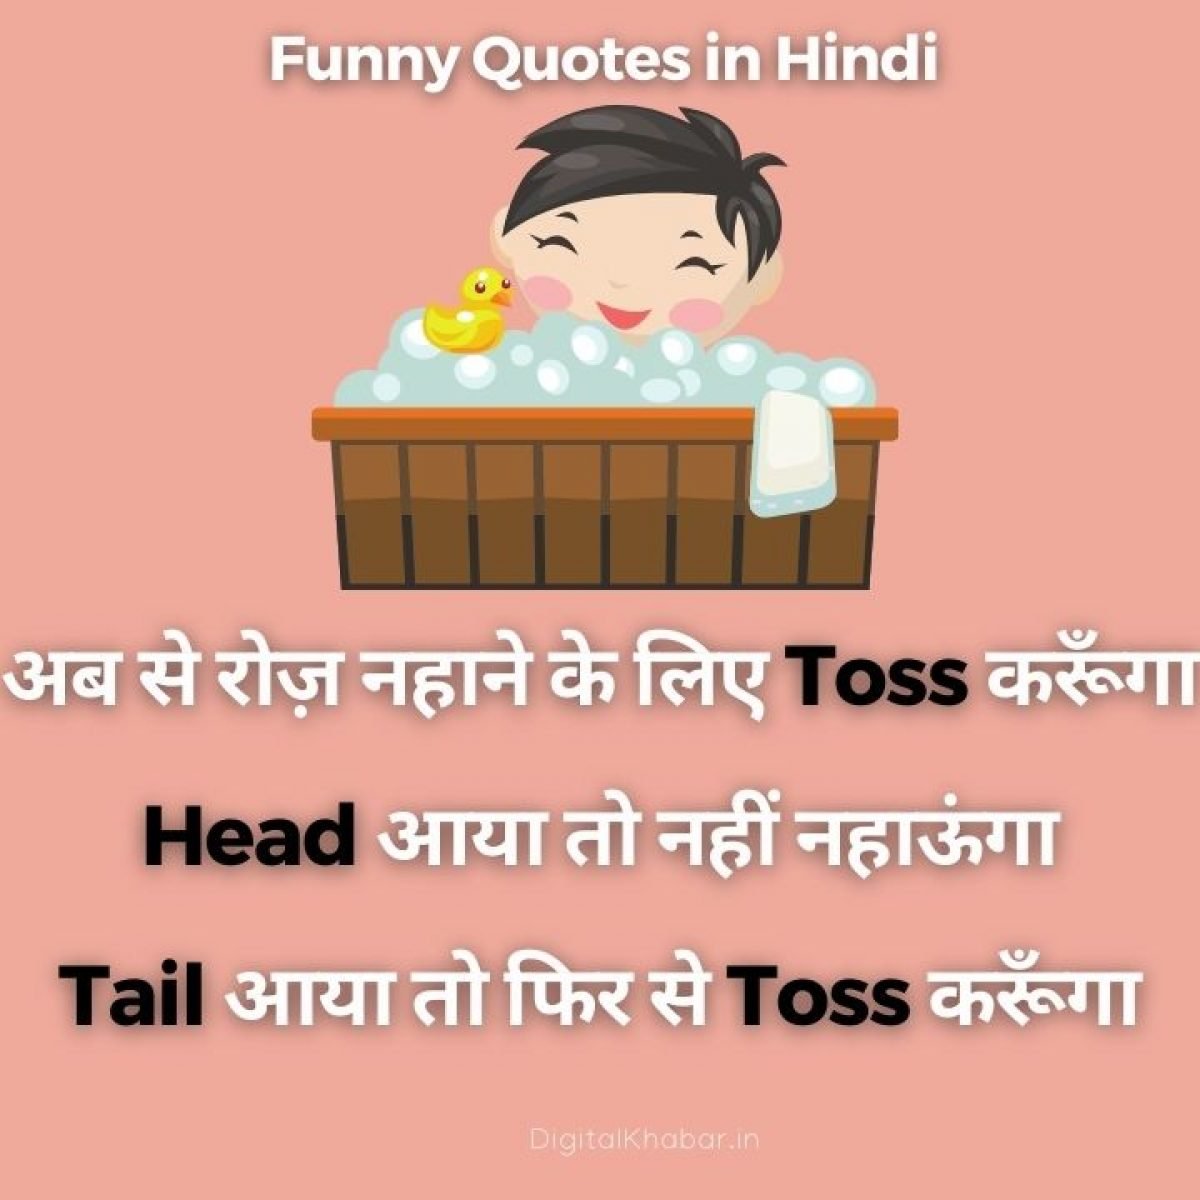 Top 999+ funny quotes in hindi with images – Amazing Collection funny quotes in hindi with images Full 4K